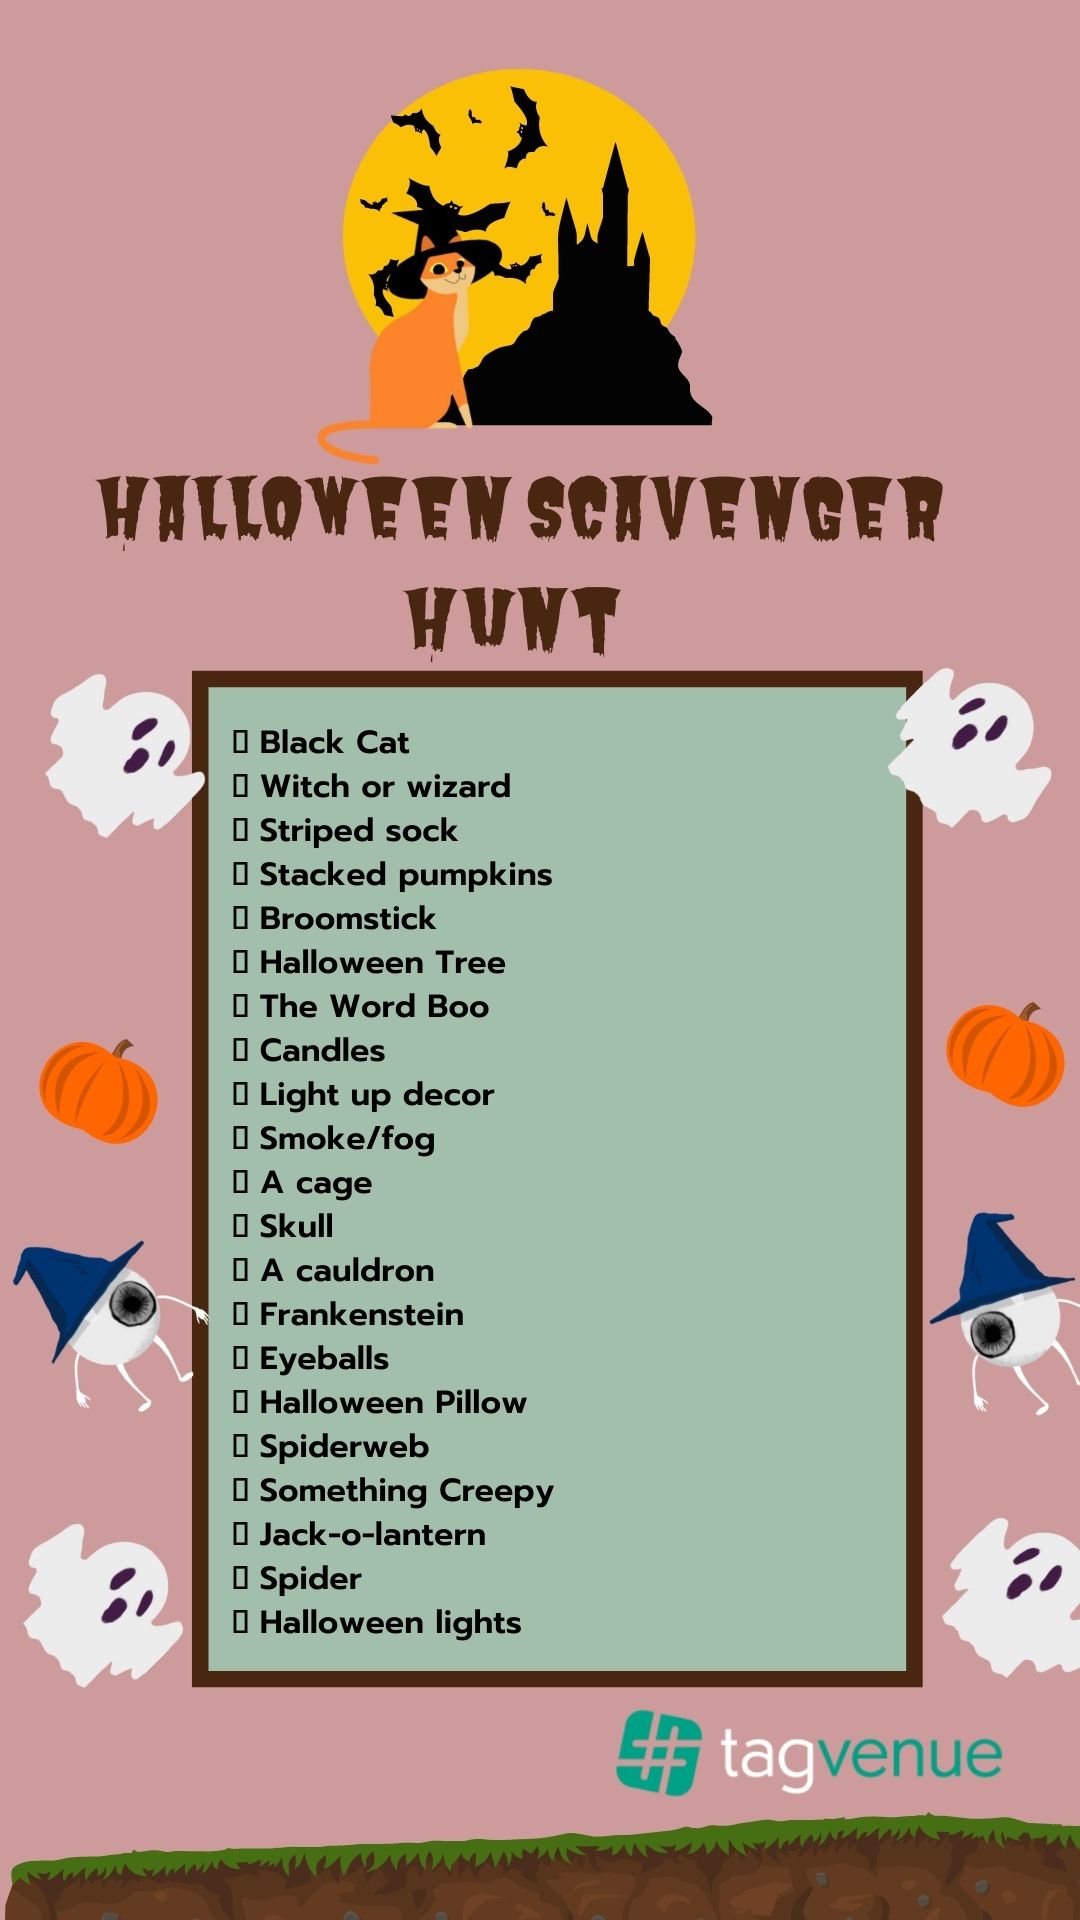 Halloween Office Party Games Halloween Games for Office -  Finland